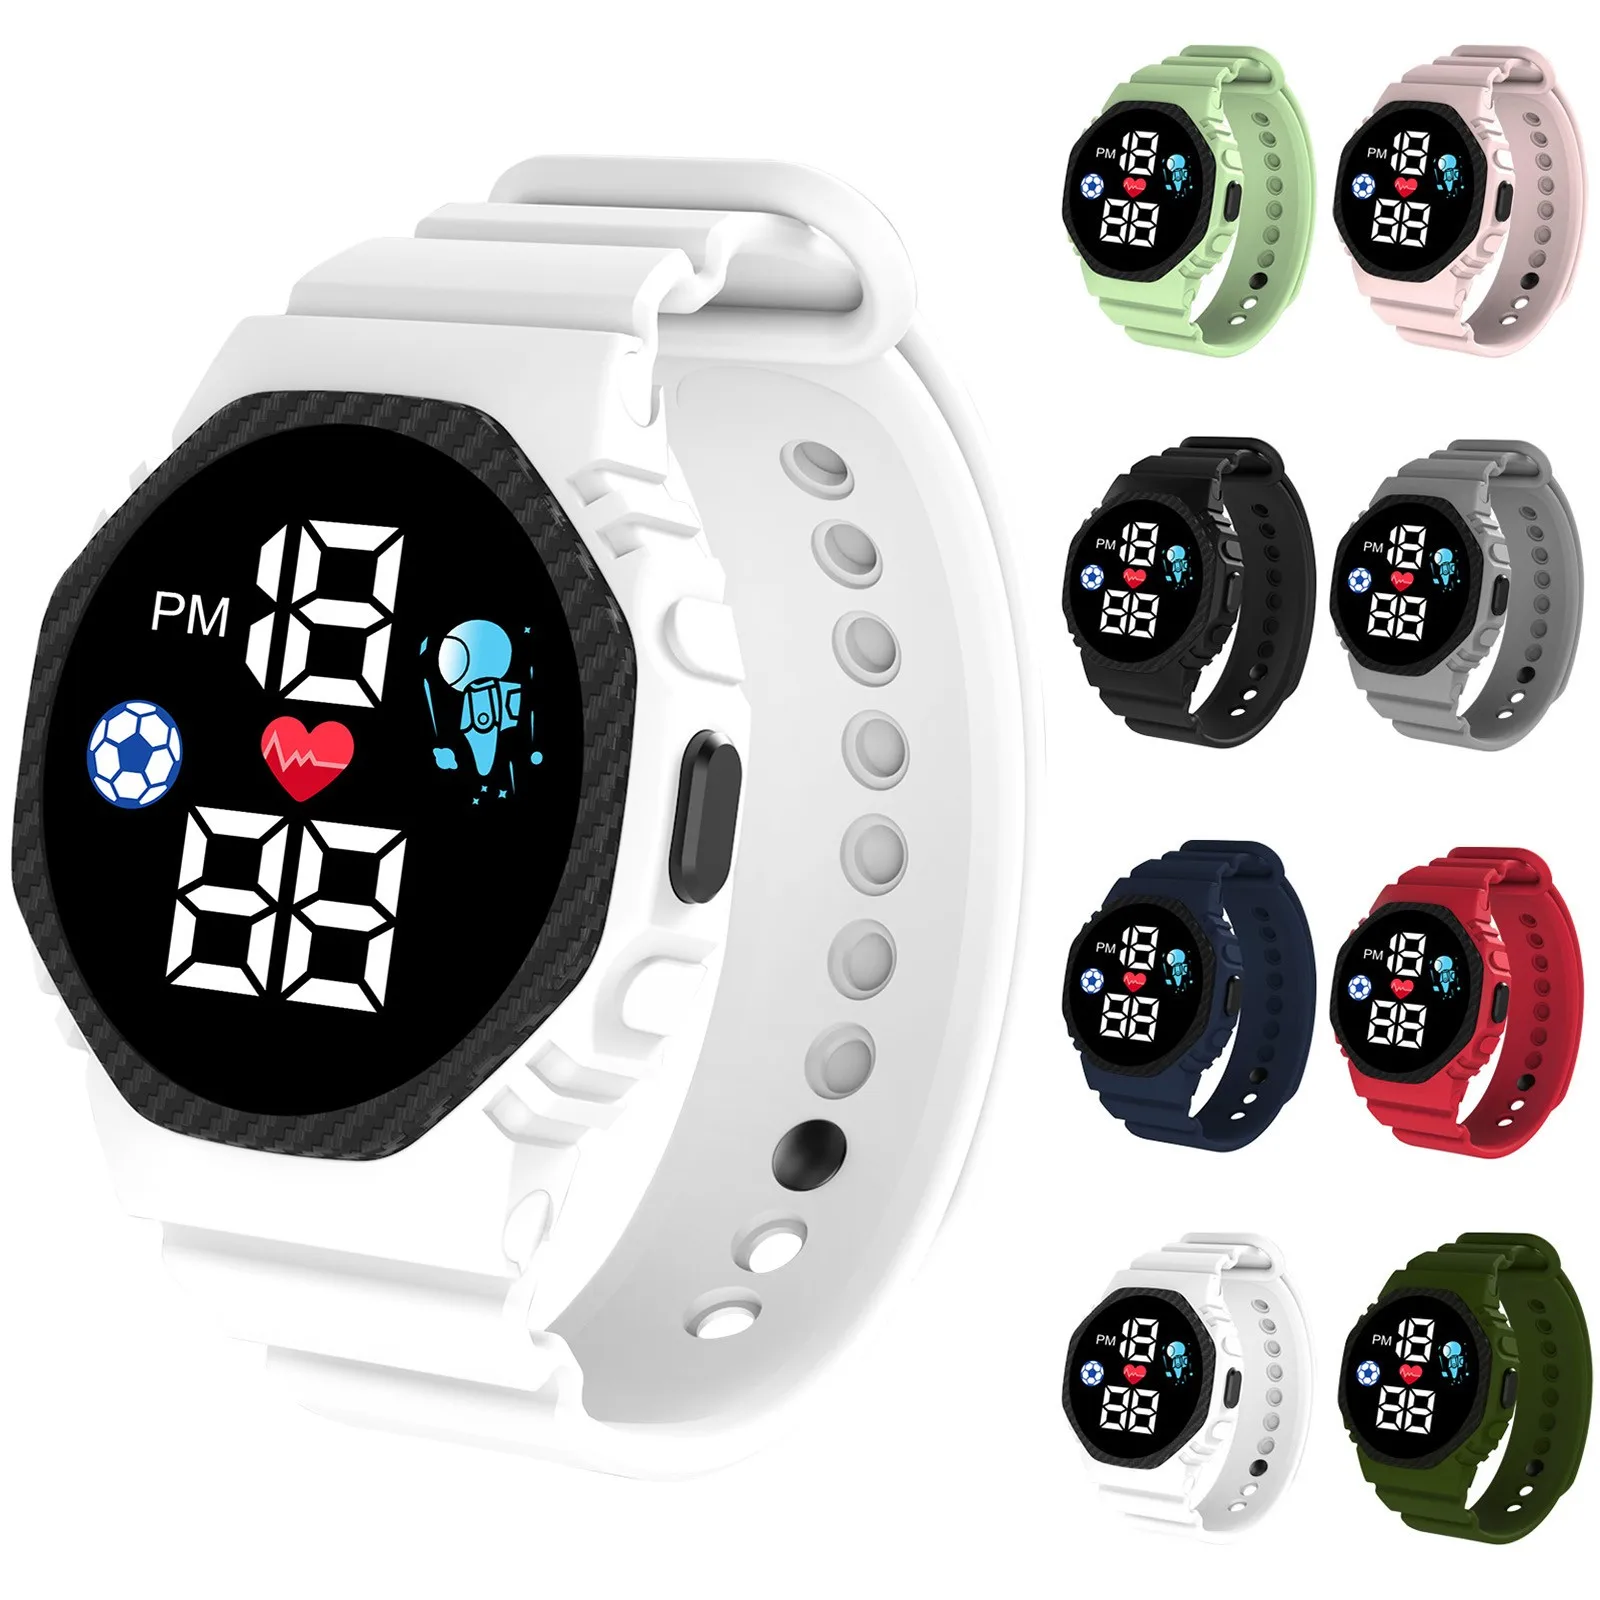 

Kawaii Kids' Smart Watch Display Week Electronic Digital Wrist Watches For Girls Boy Students Outdoor Sports Montres Pour Enfant